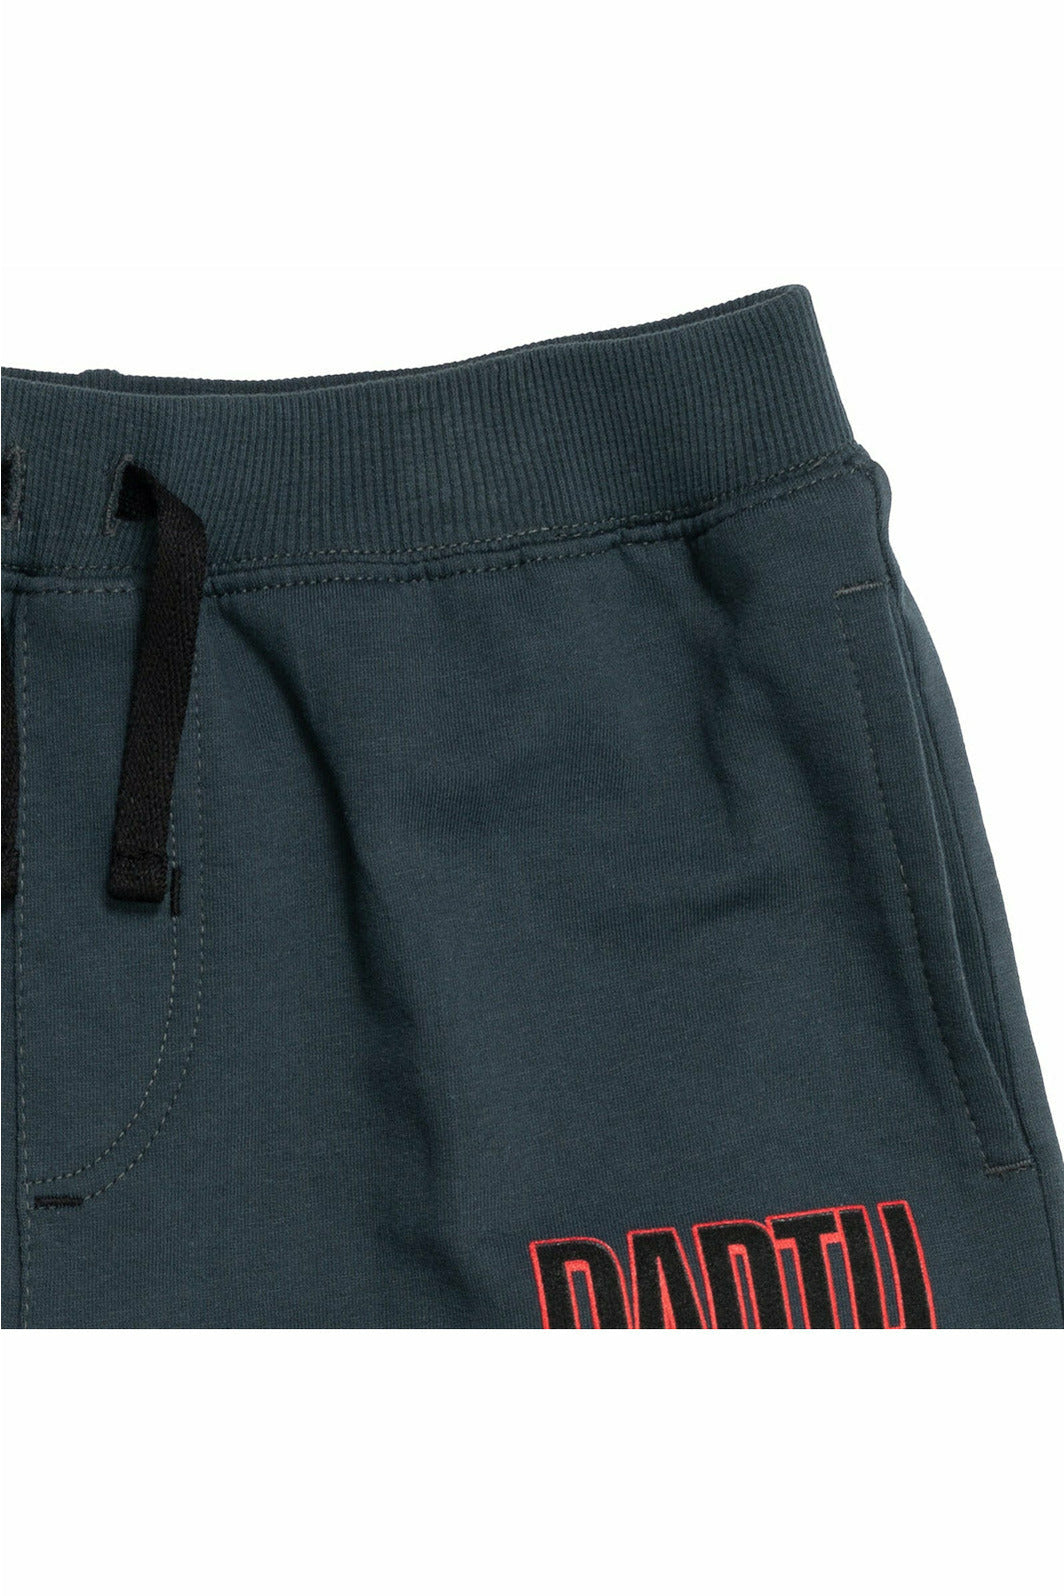 Star Wars French Terry 2 Pack Shorts